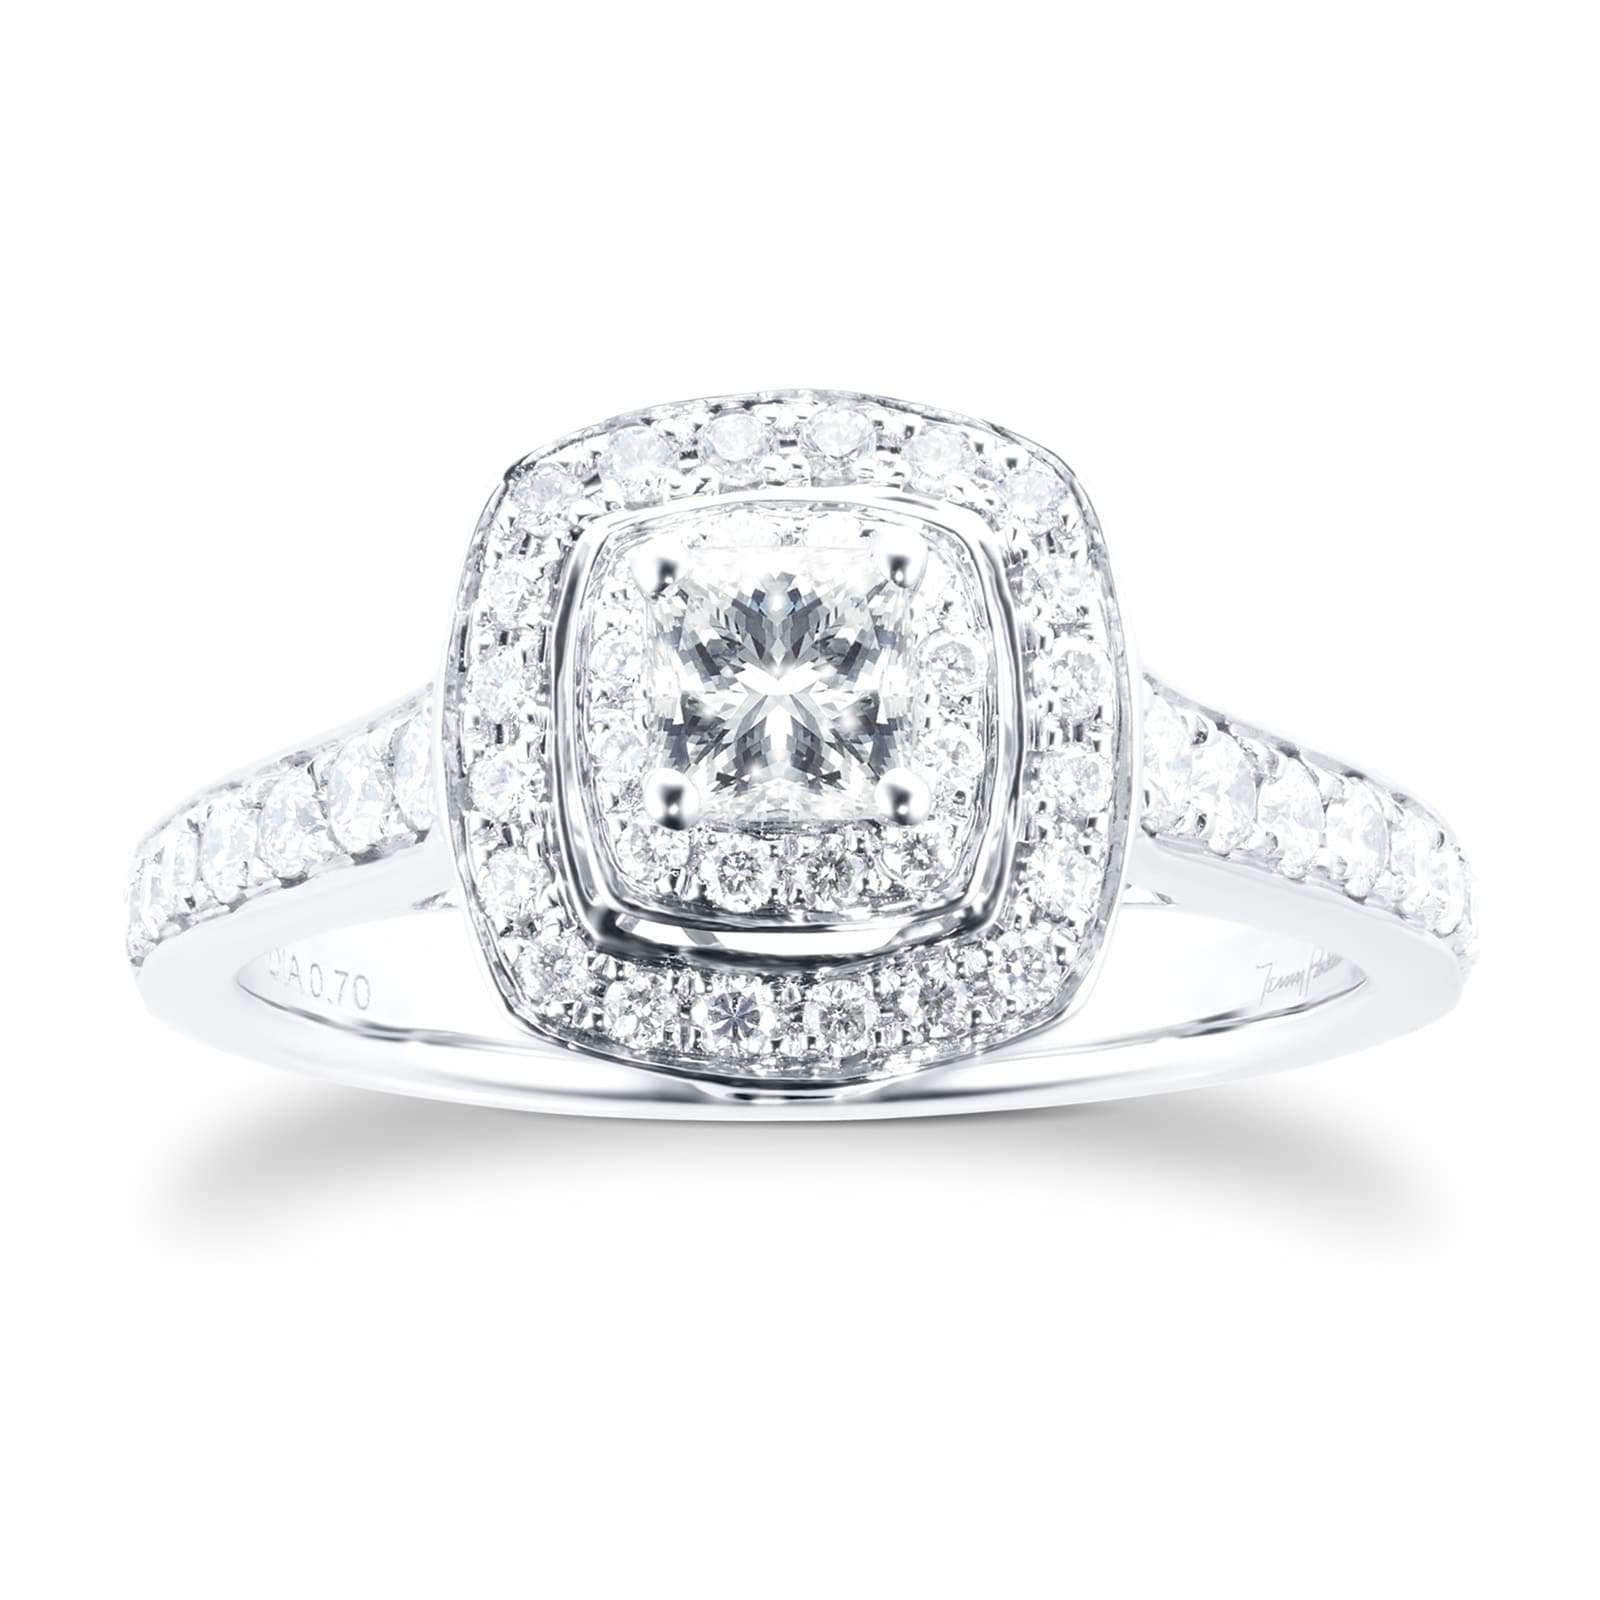 Cushion Cut 0.70 Carat Total Weight Double Halo Diamond Ring In 18 Carat White Gold - Ring Size J